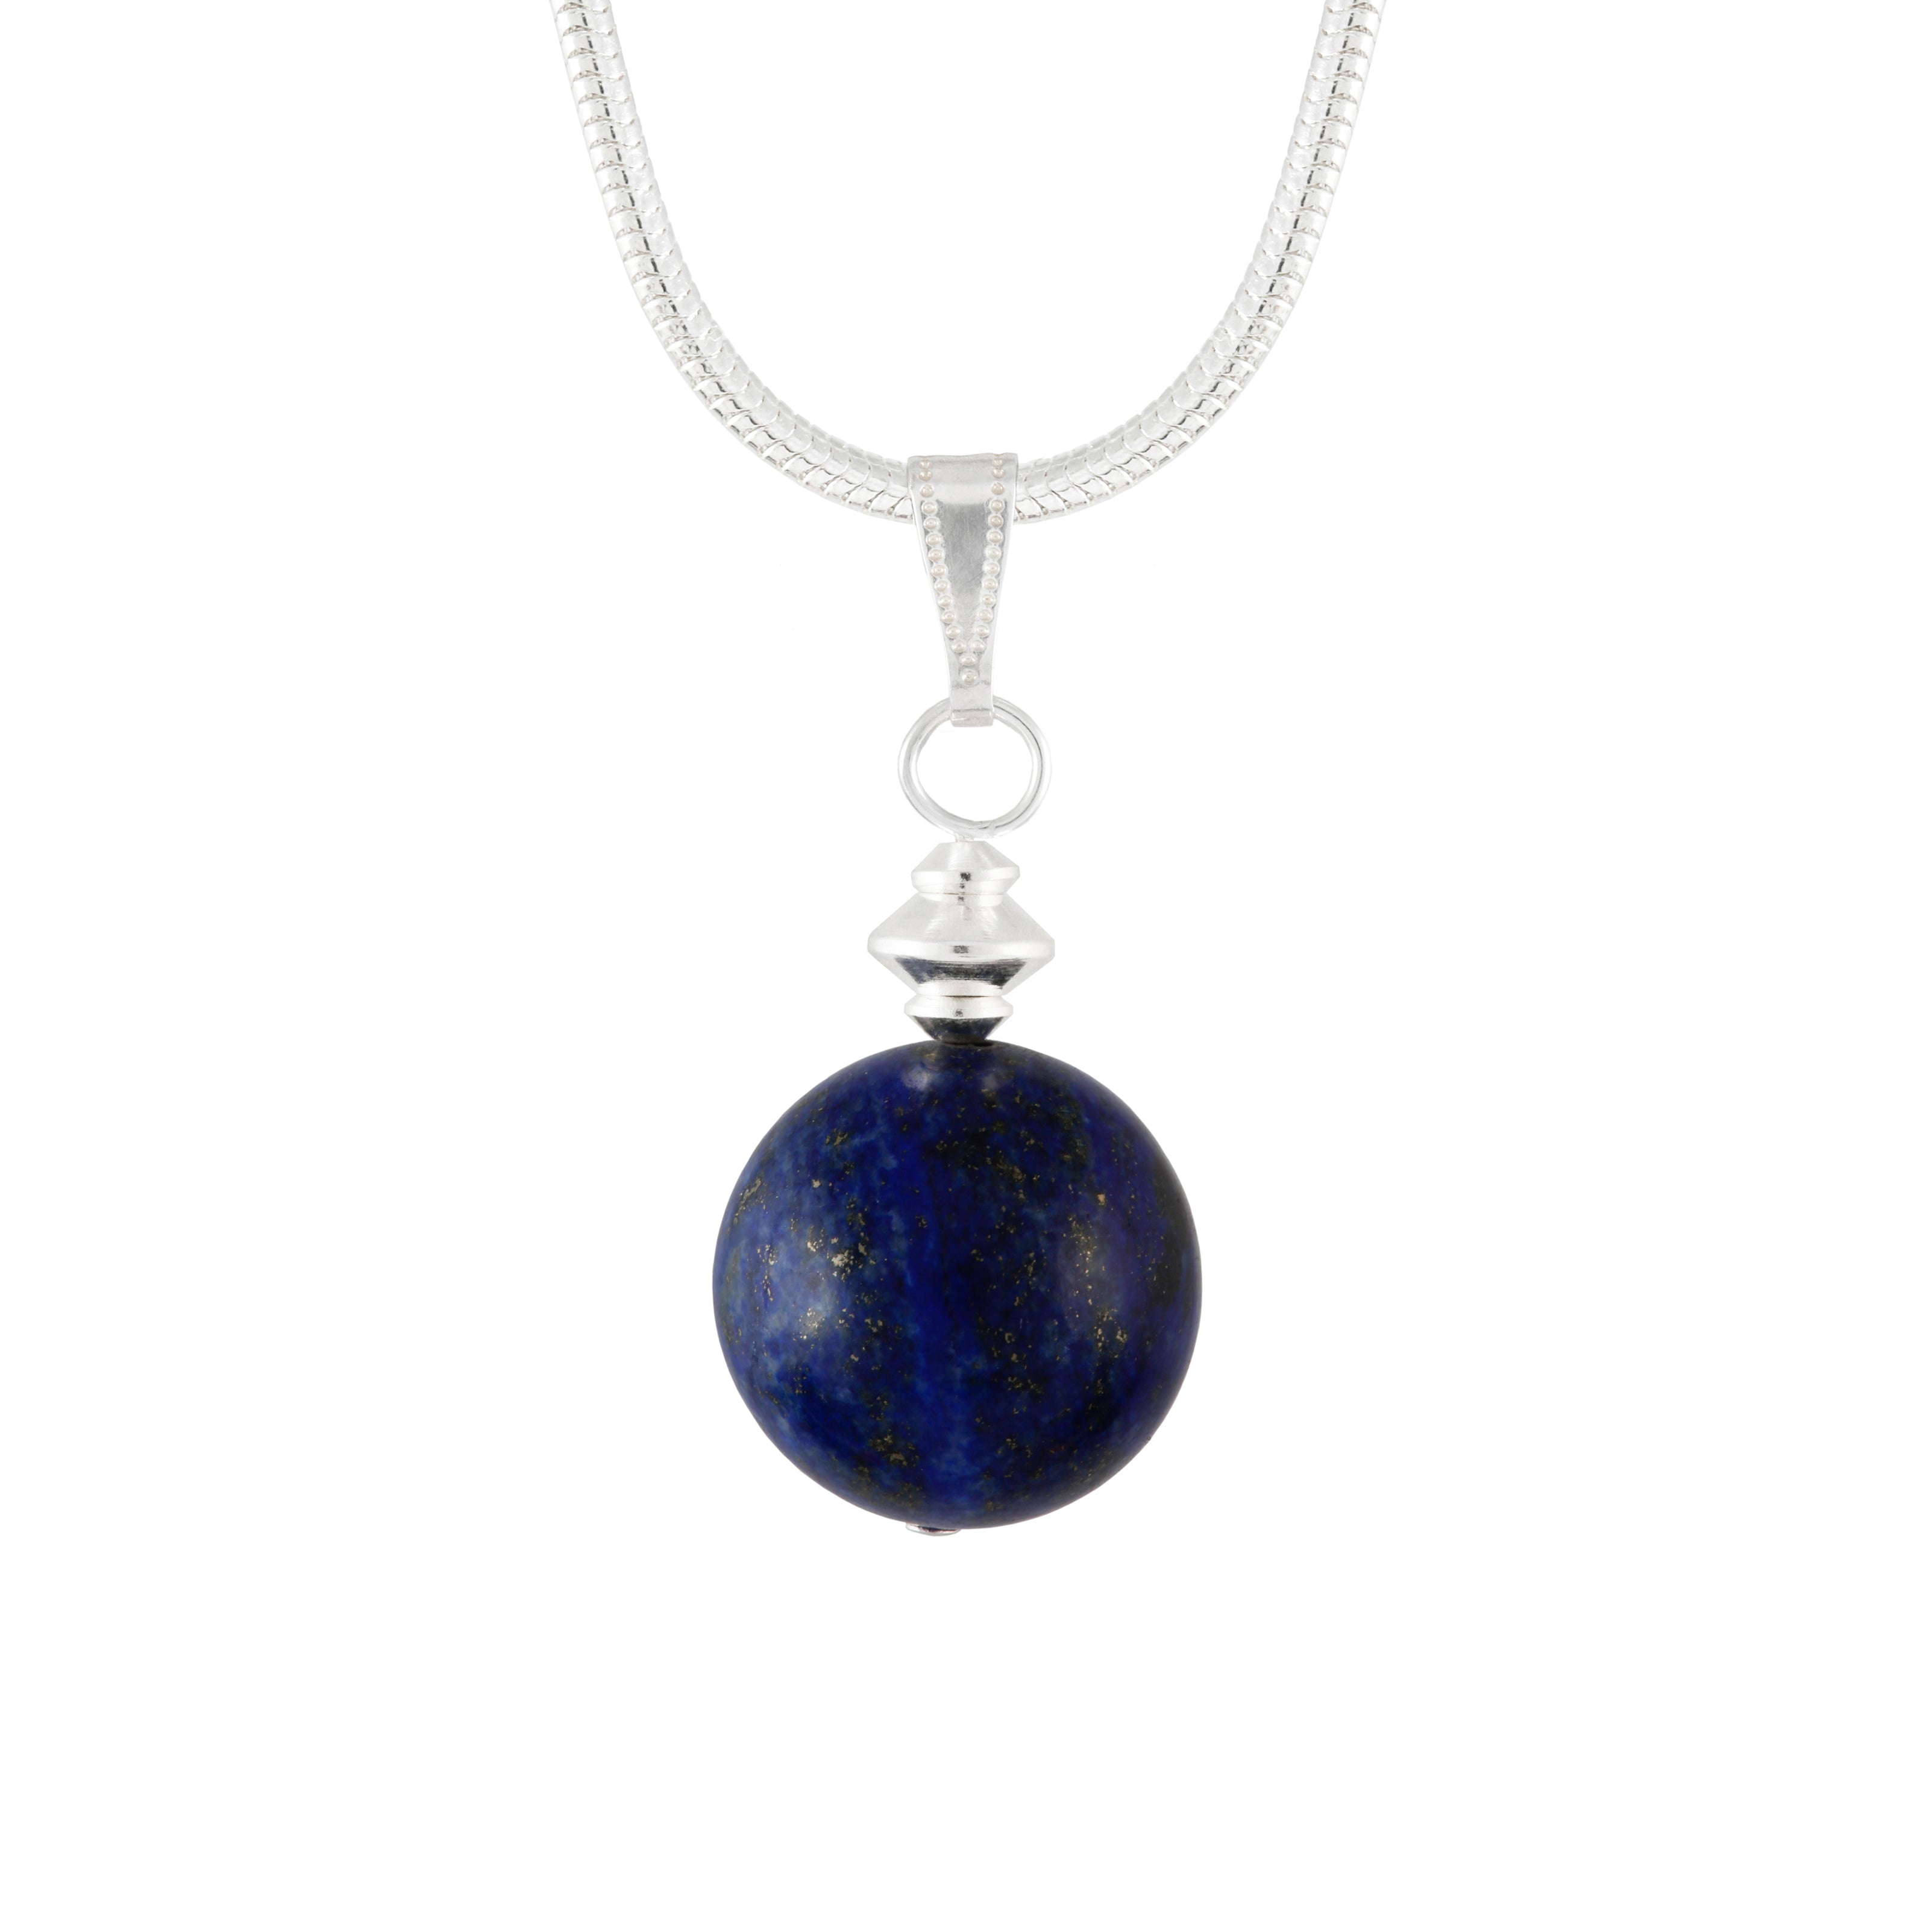 Lapis Lazuli Blue Large Globe Necklace on Silver Plated Chain or Faux Suede Lace